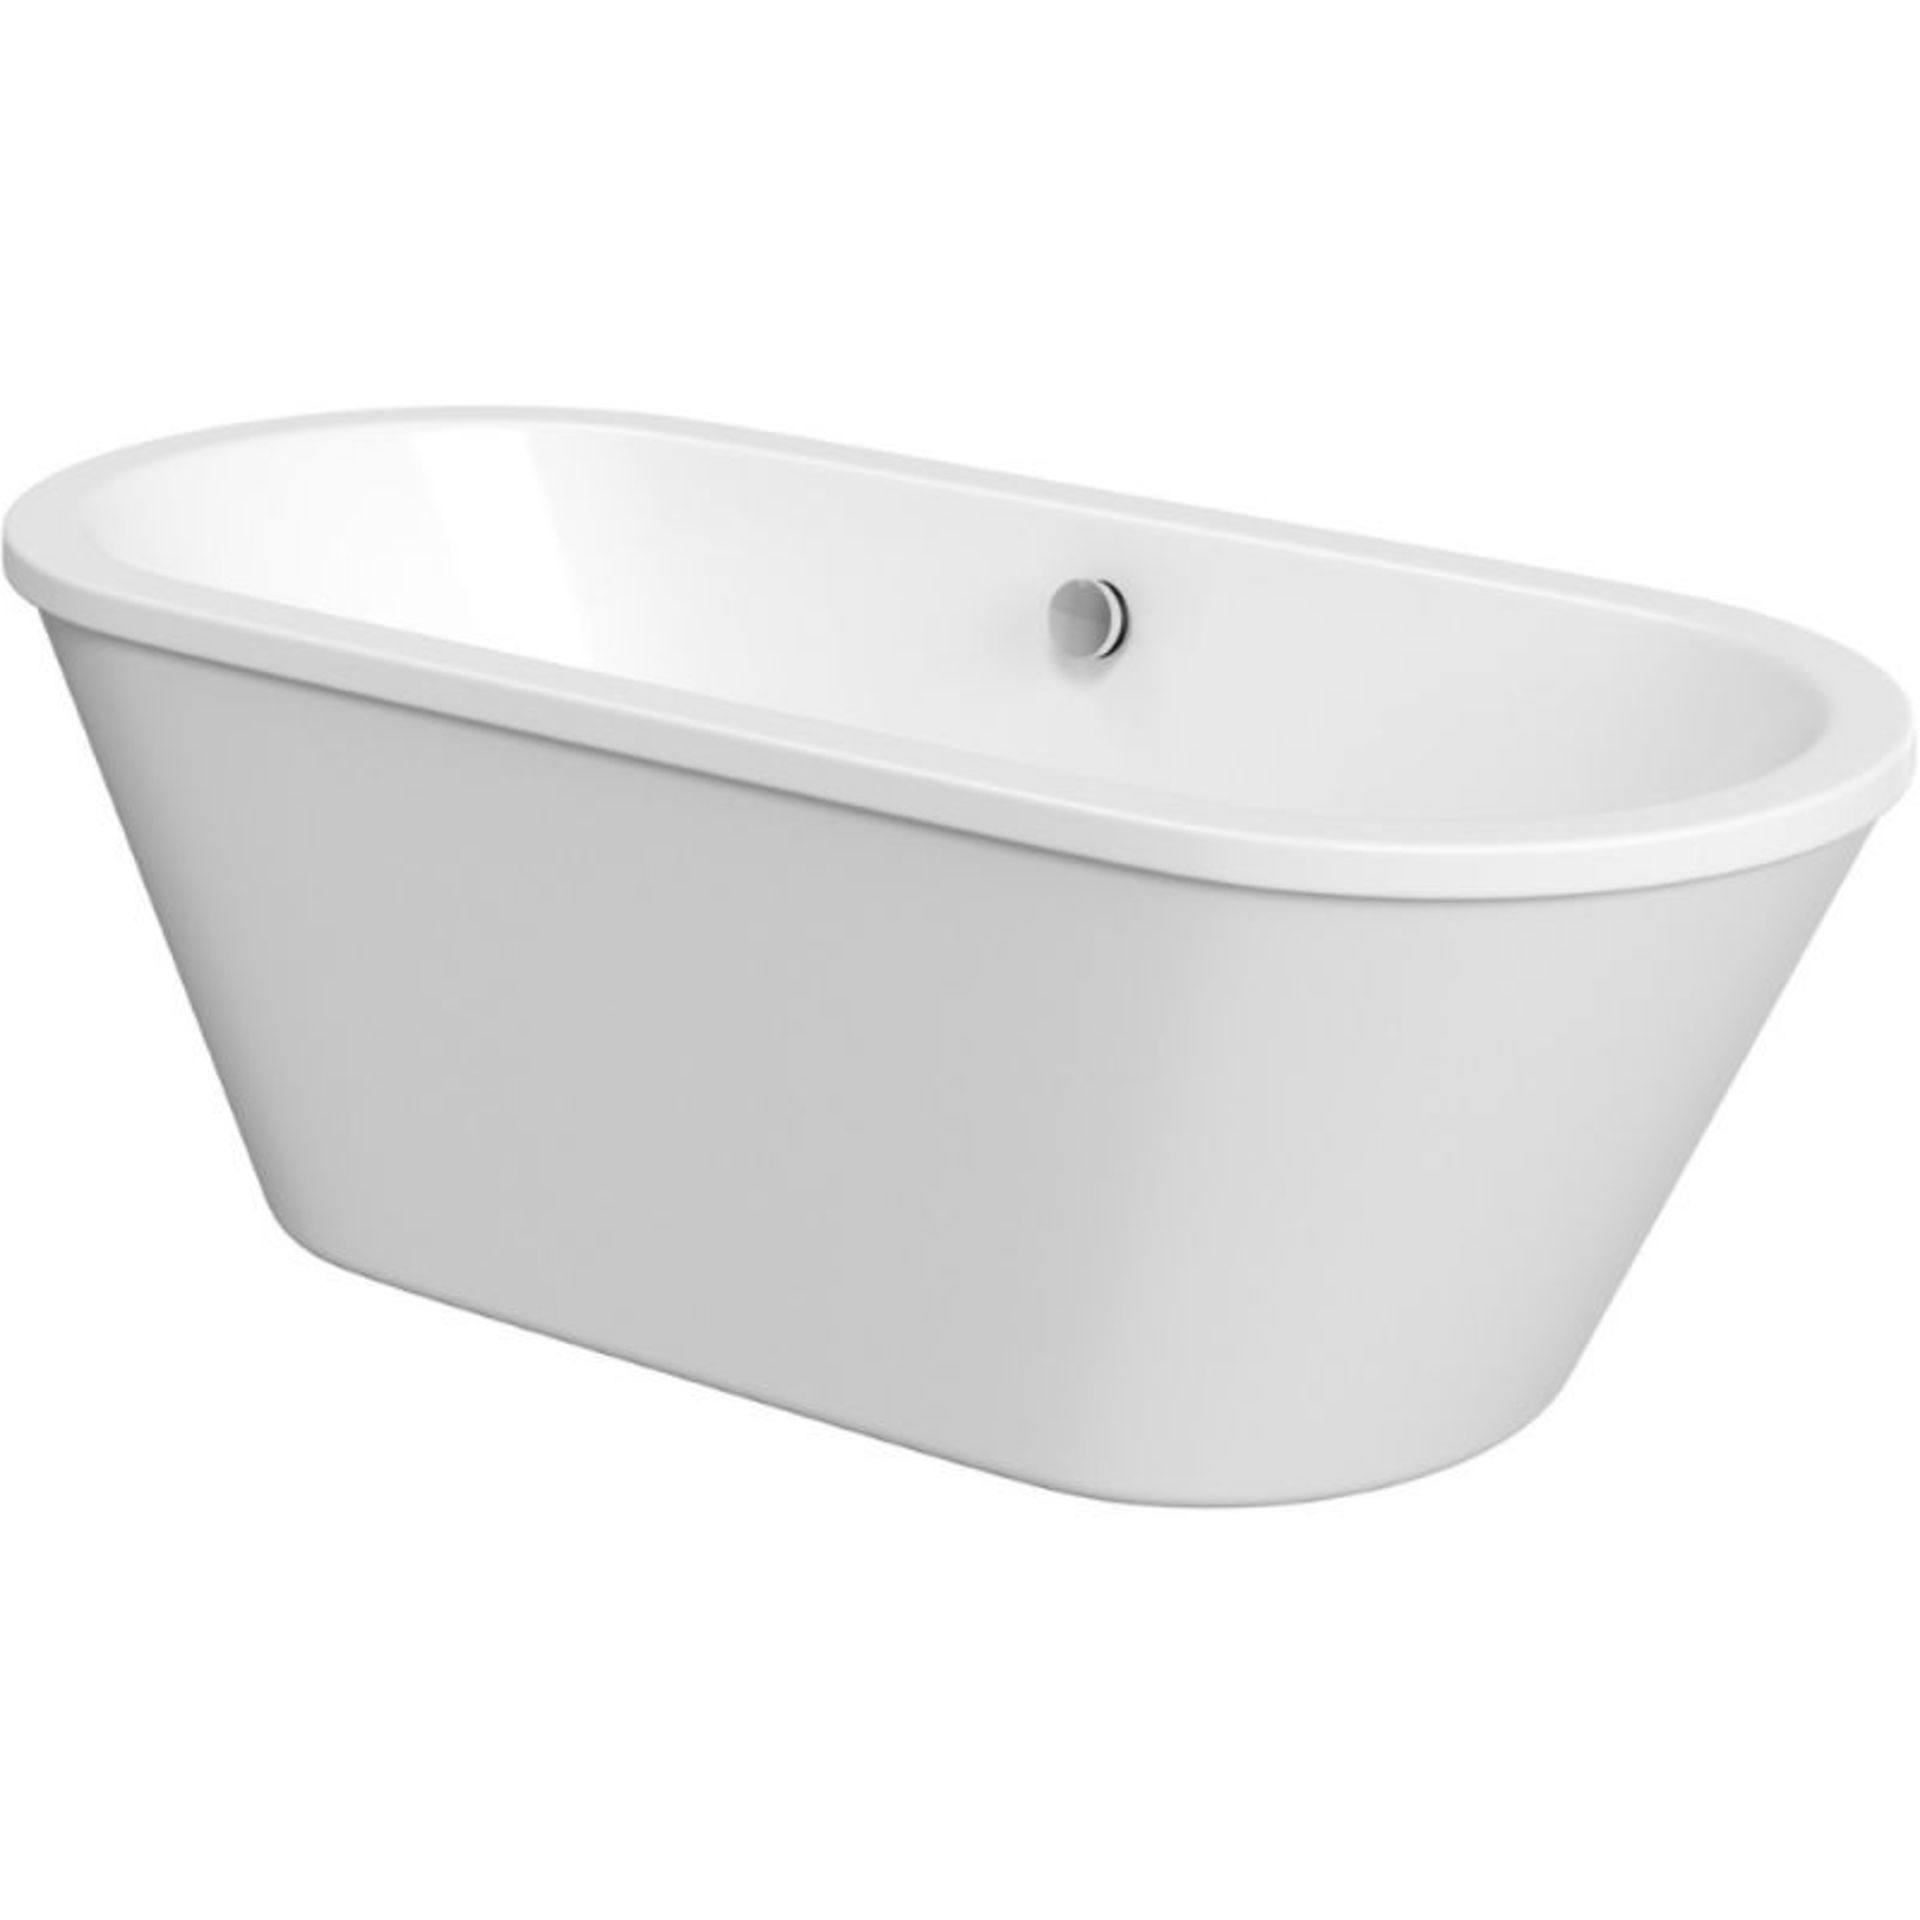 NEW (E77) Savoy 1700mmx750mm Double Ended White Freestanding Bath. RRP £2,499.The Savoy doubl... - Image 2 of 2